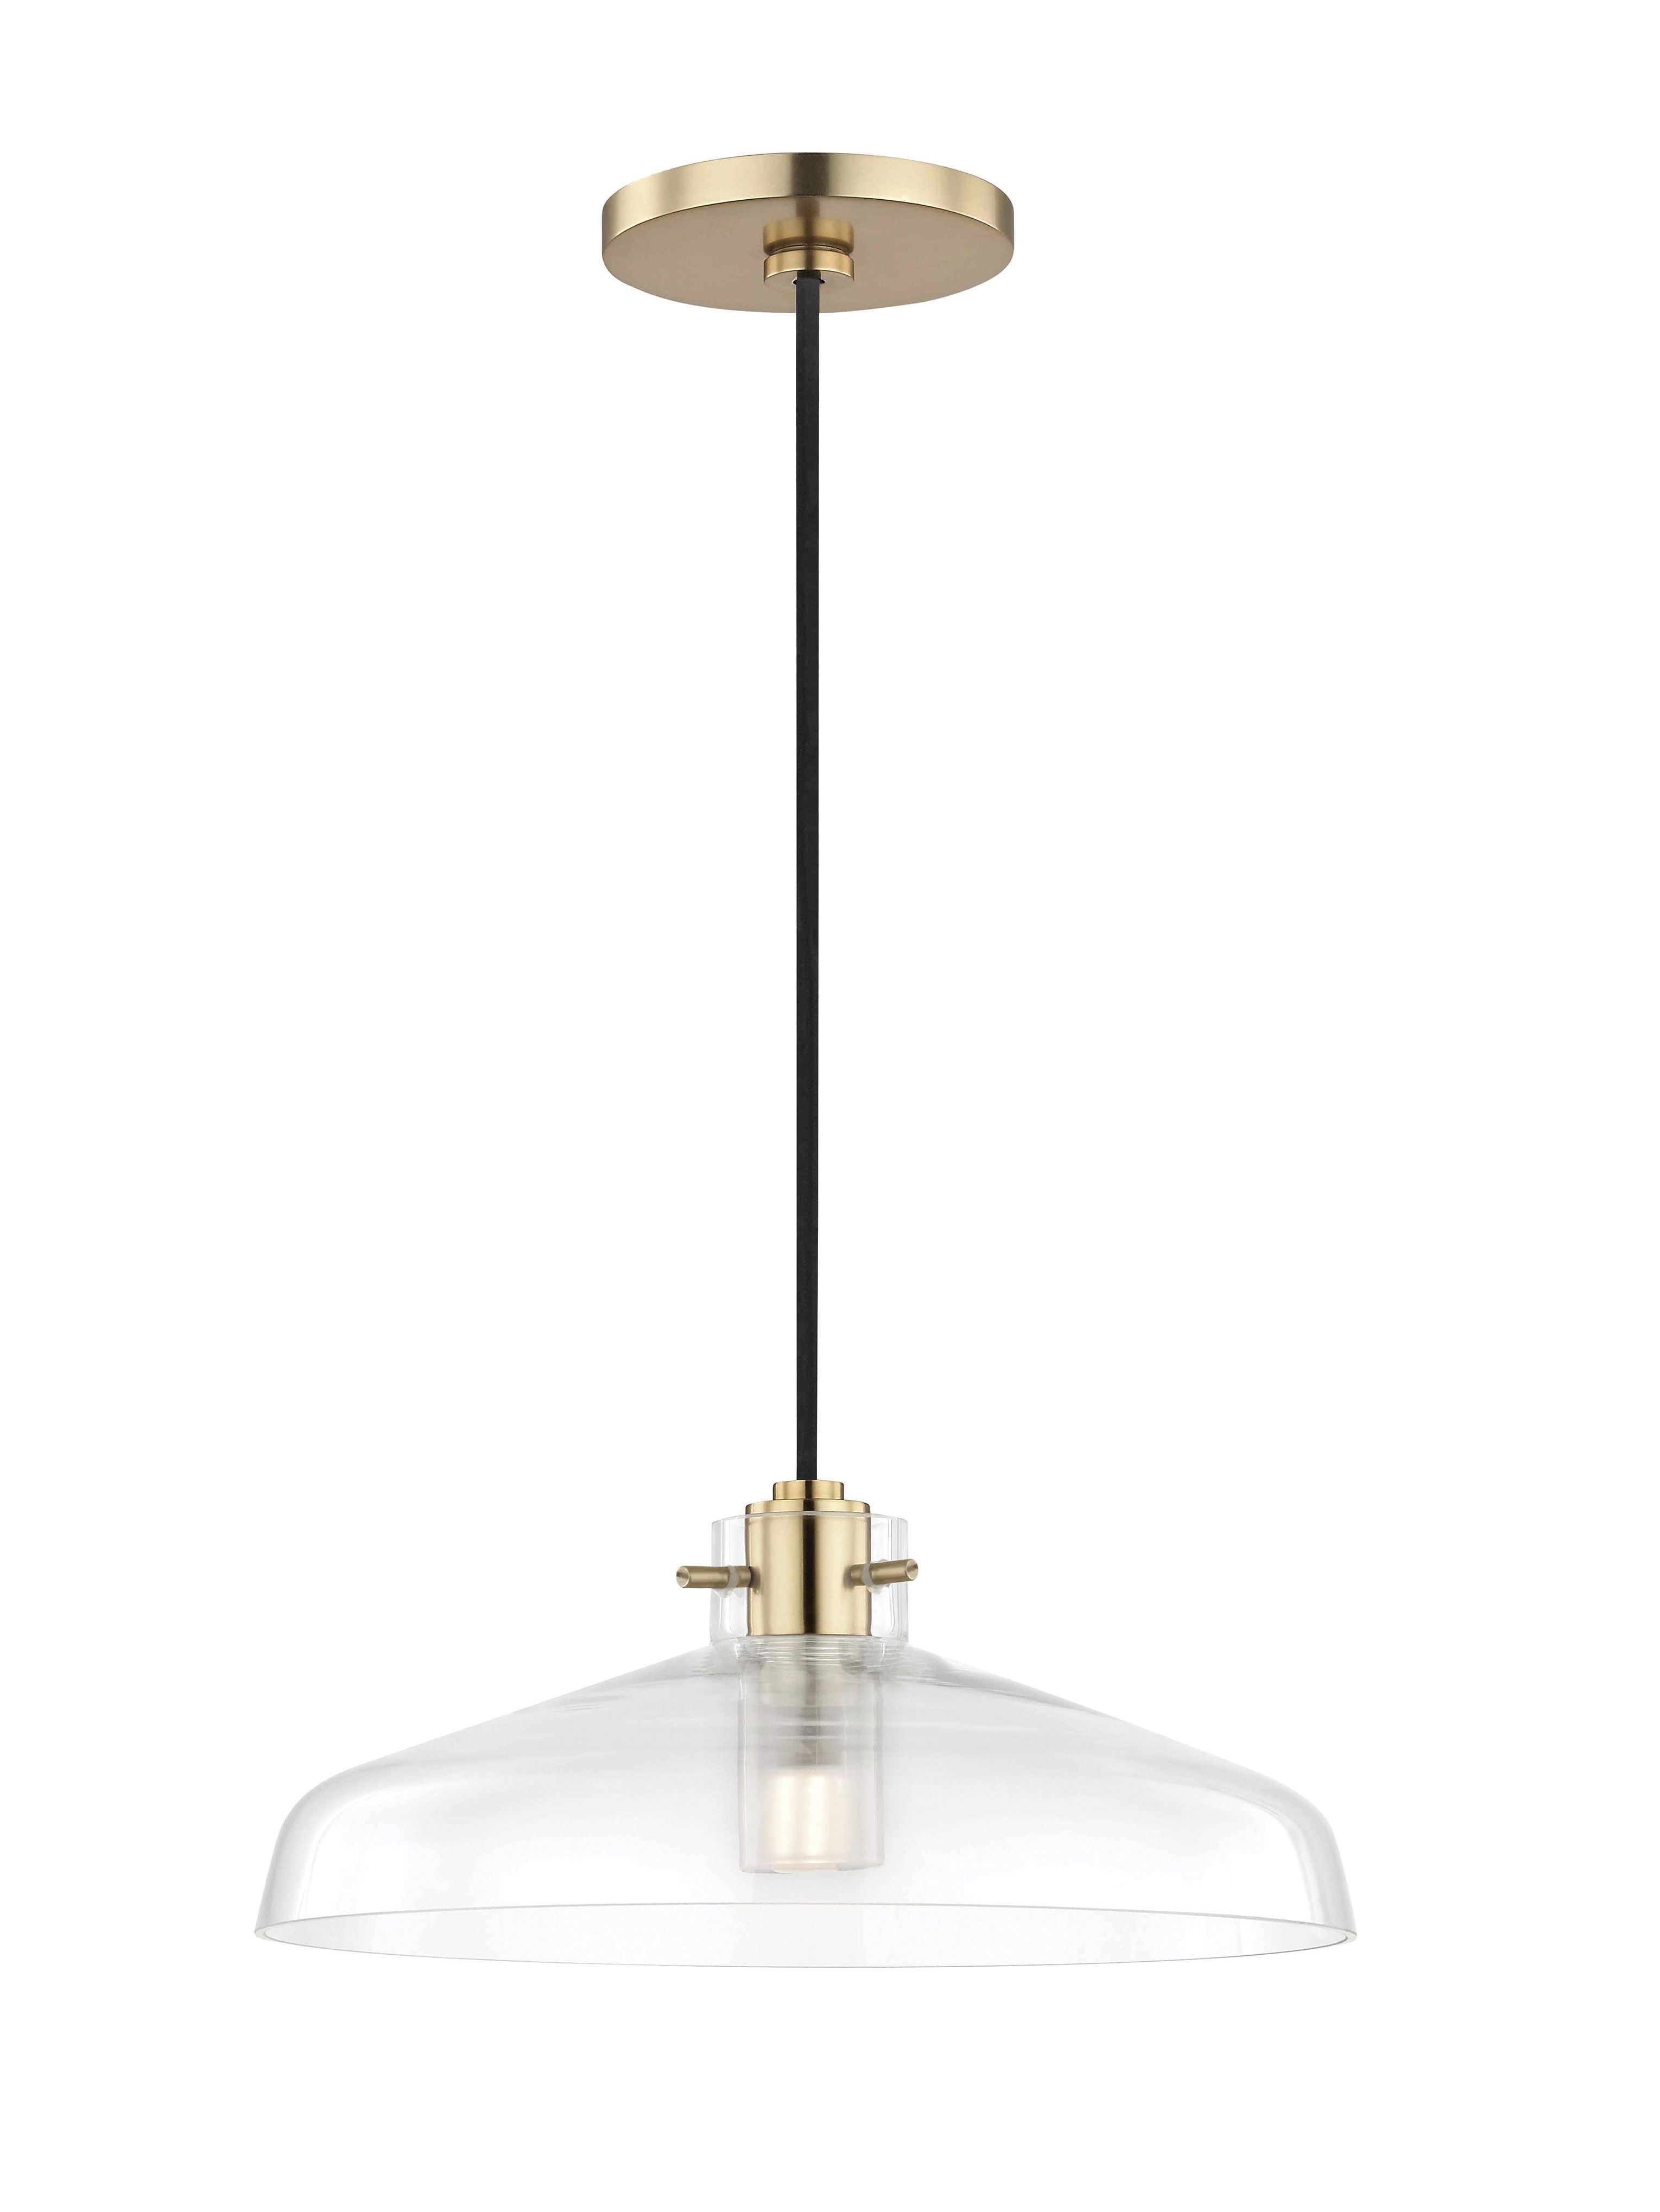 Give Your Space A Mid Century Update With This Pendant Lamp Intended For Cayden 1 Light Single Globe Pendants (View 18 of 30)